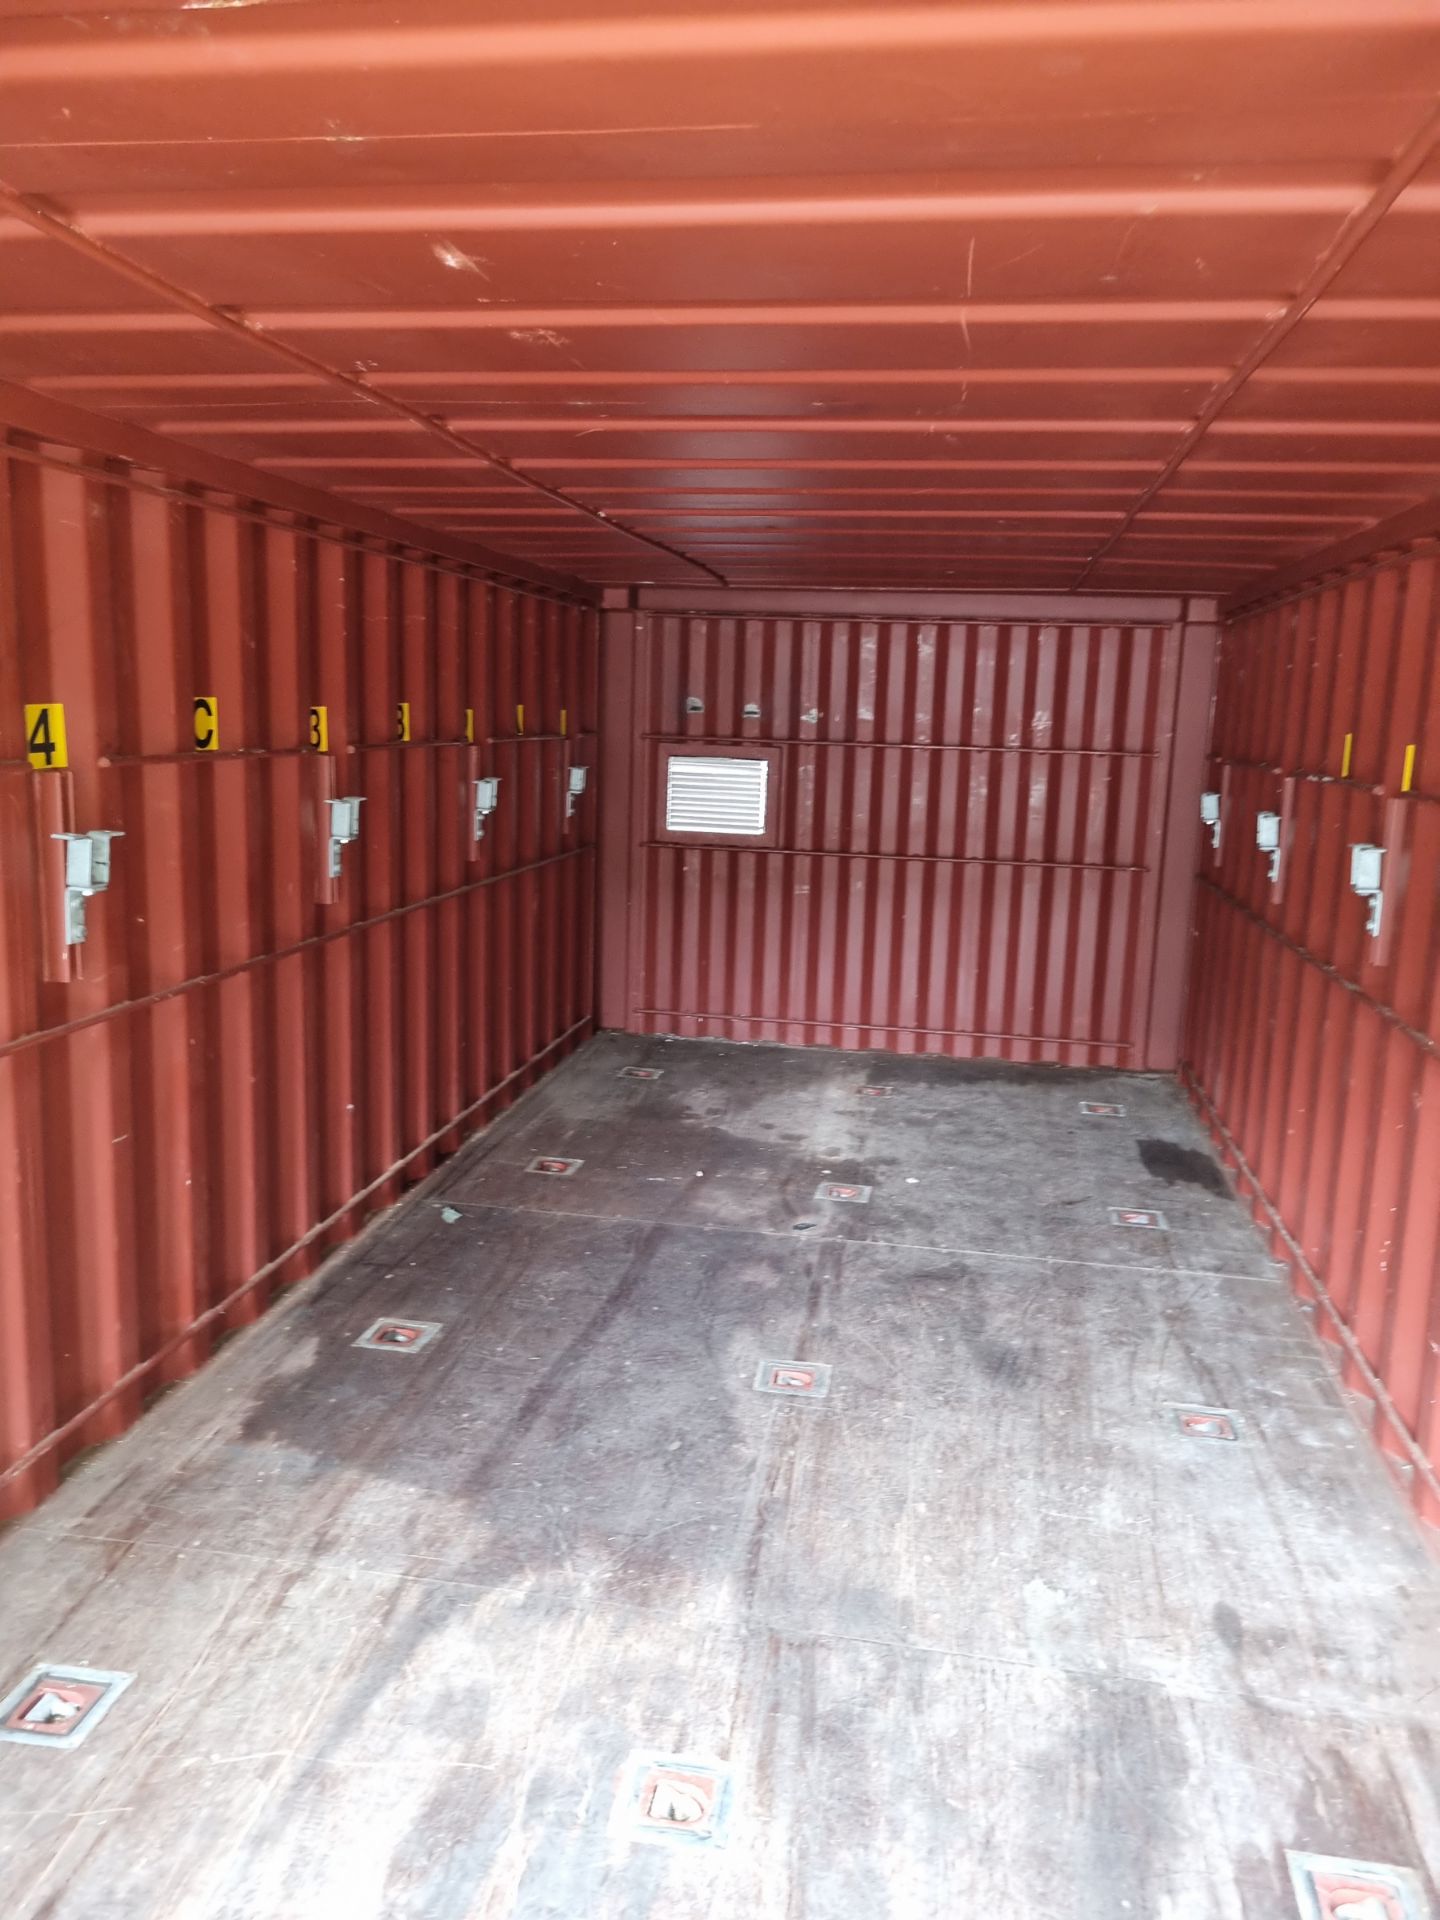 Stonehaven Engineering Ltd transportable storage container ISO 499/99/09 - Image 7 of 9